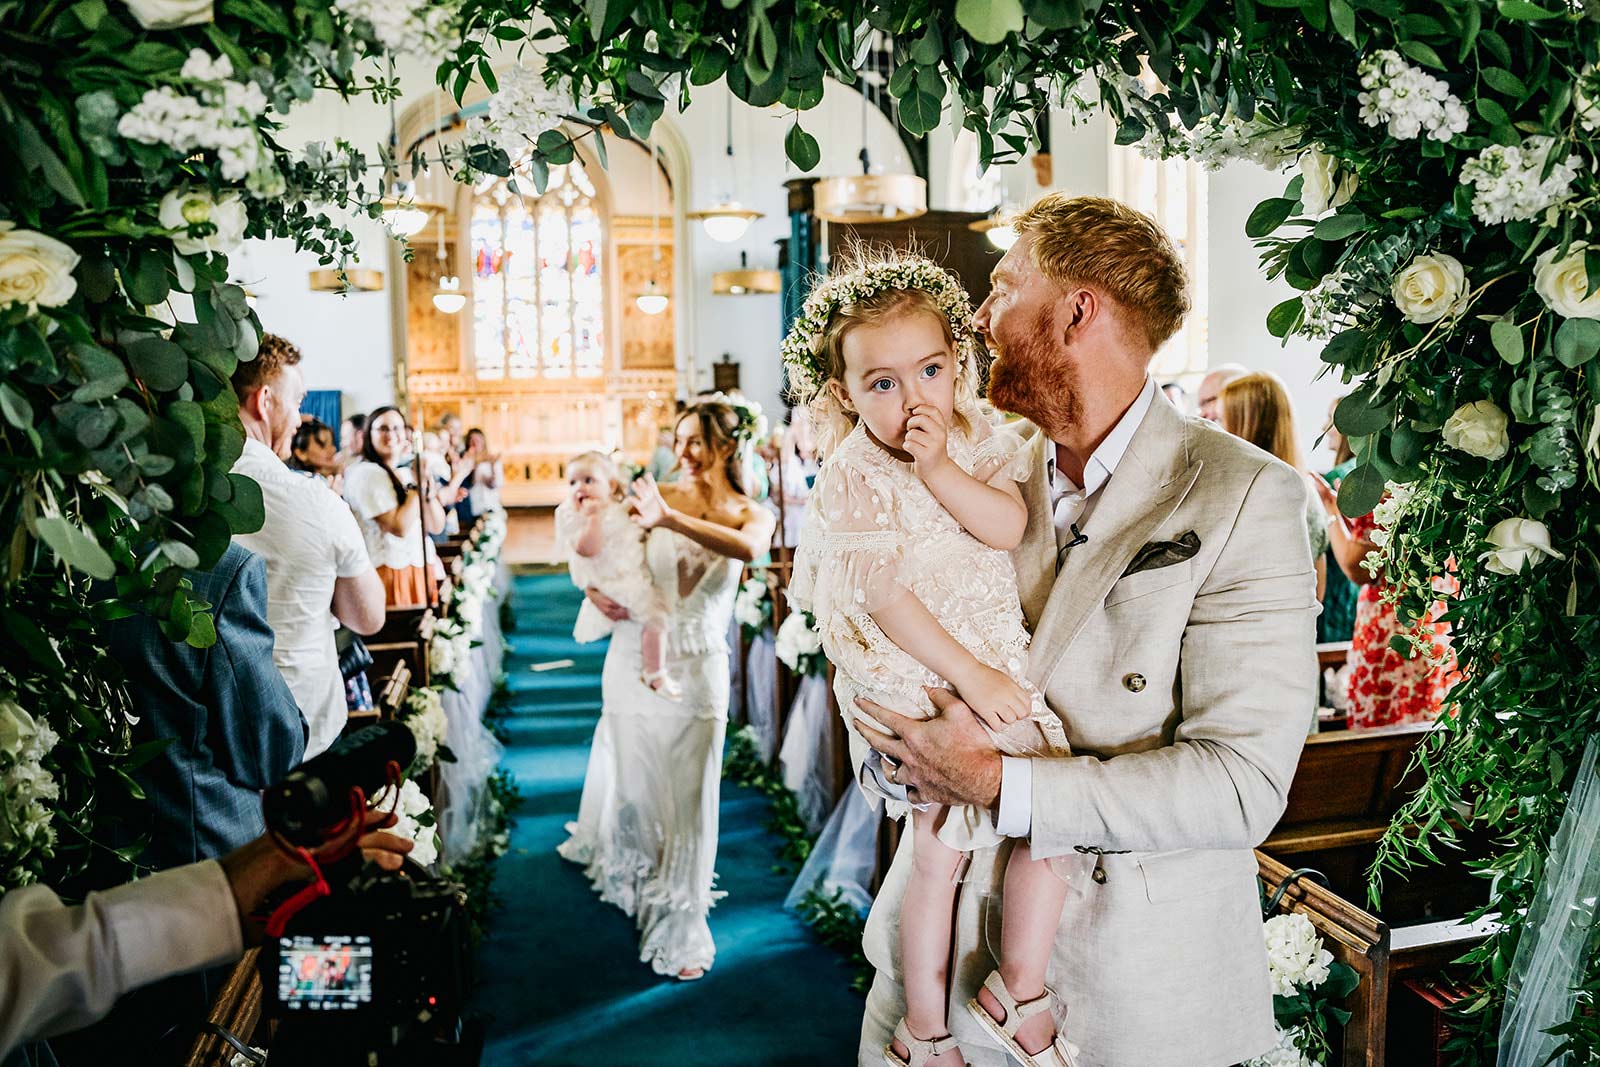 Groom and Bride leaving wedding chapel with babies in arms